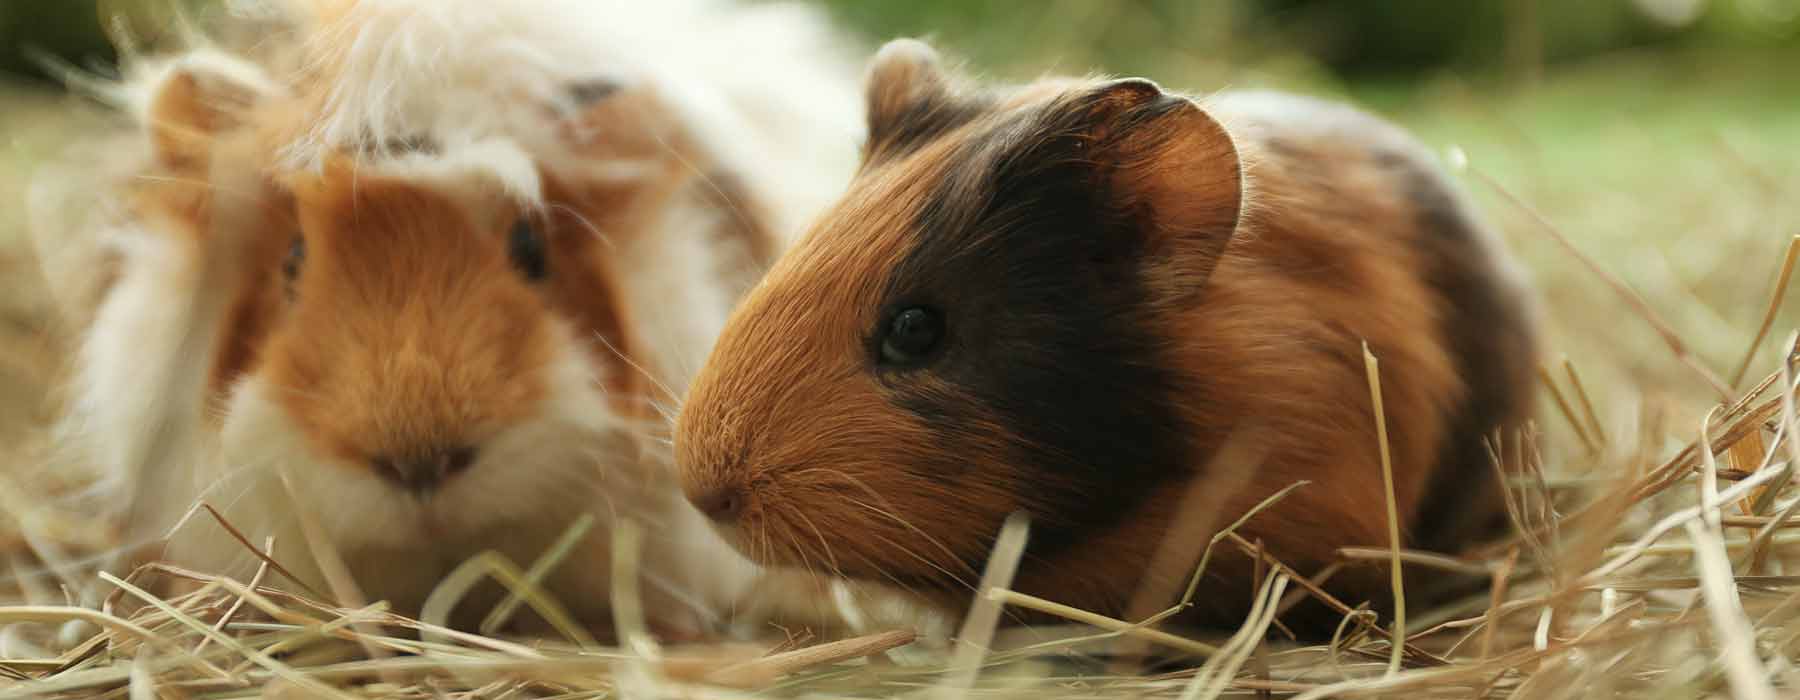 guinea pig relaxing in some hay